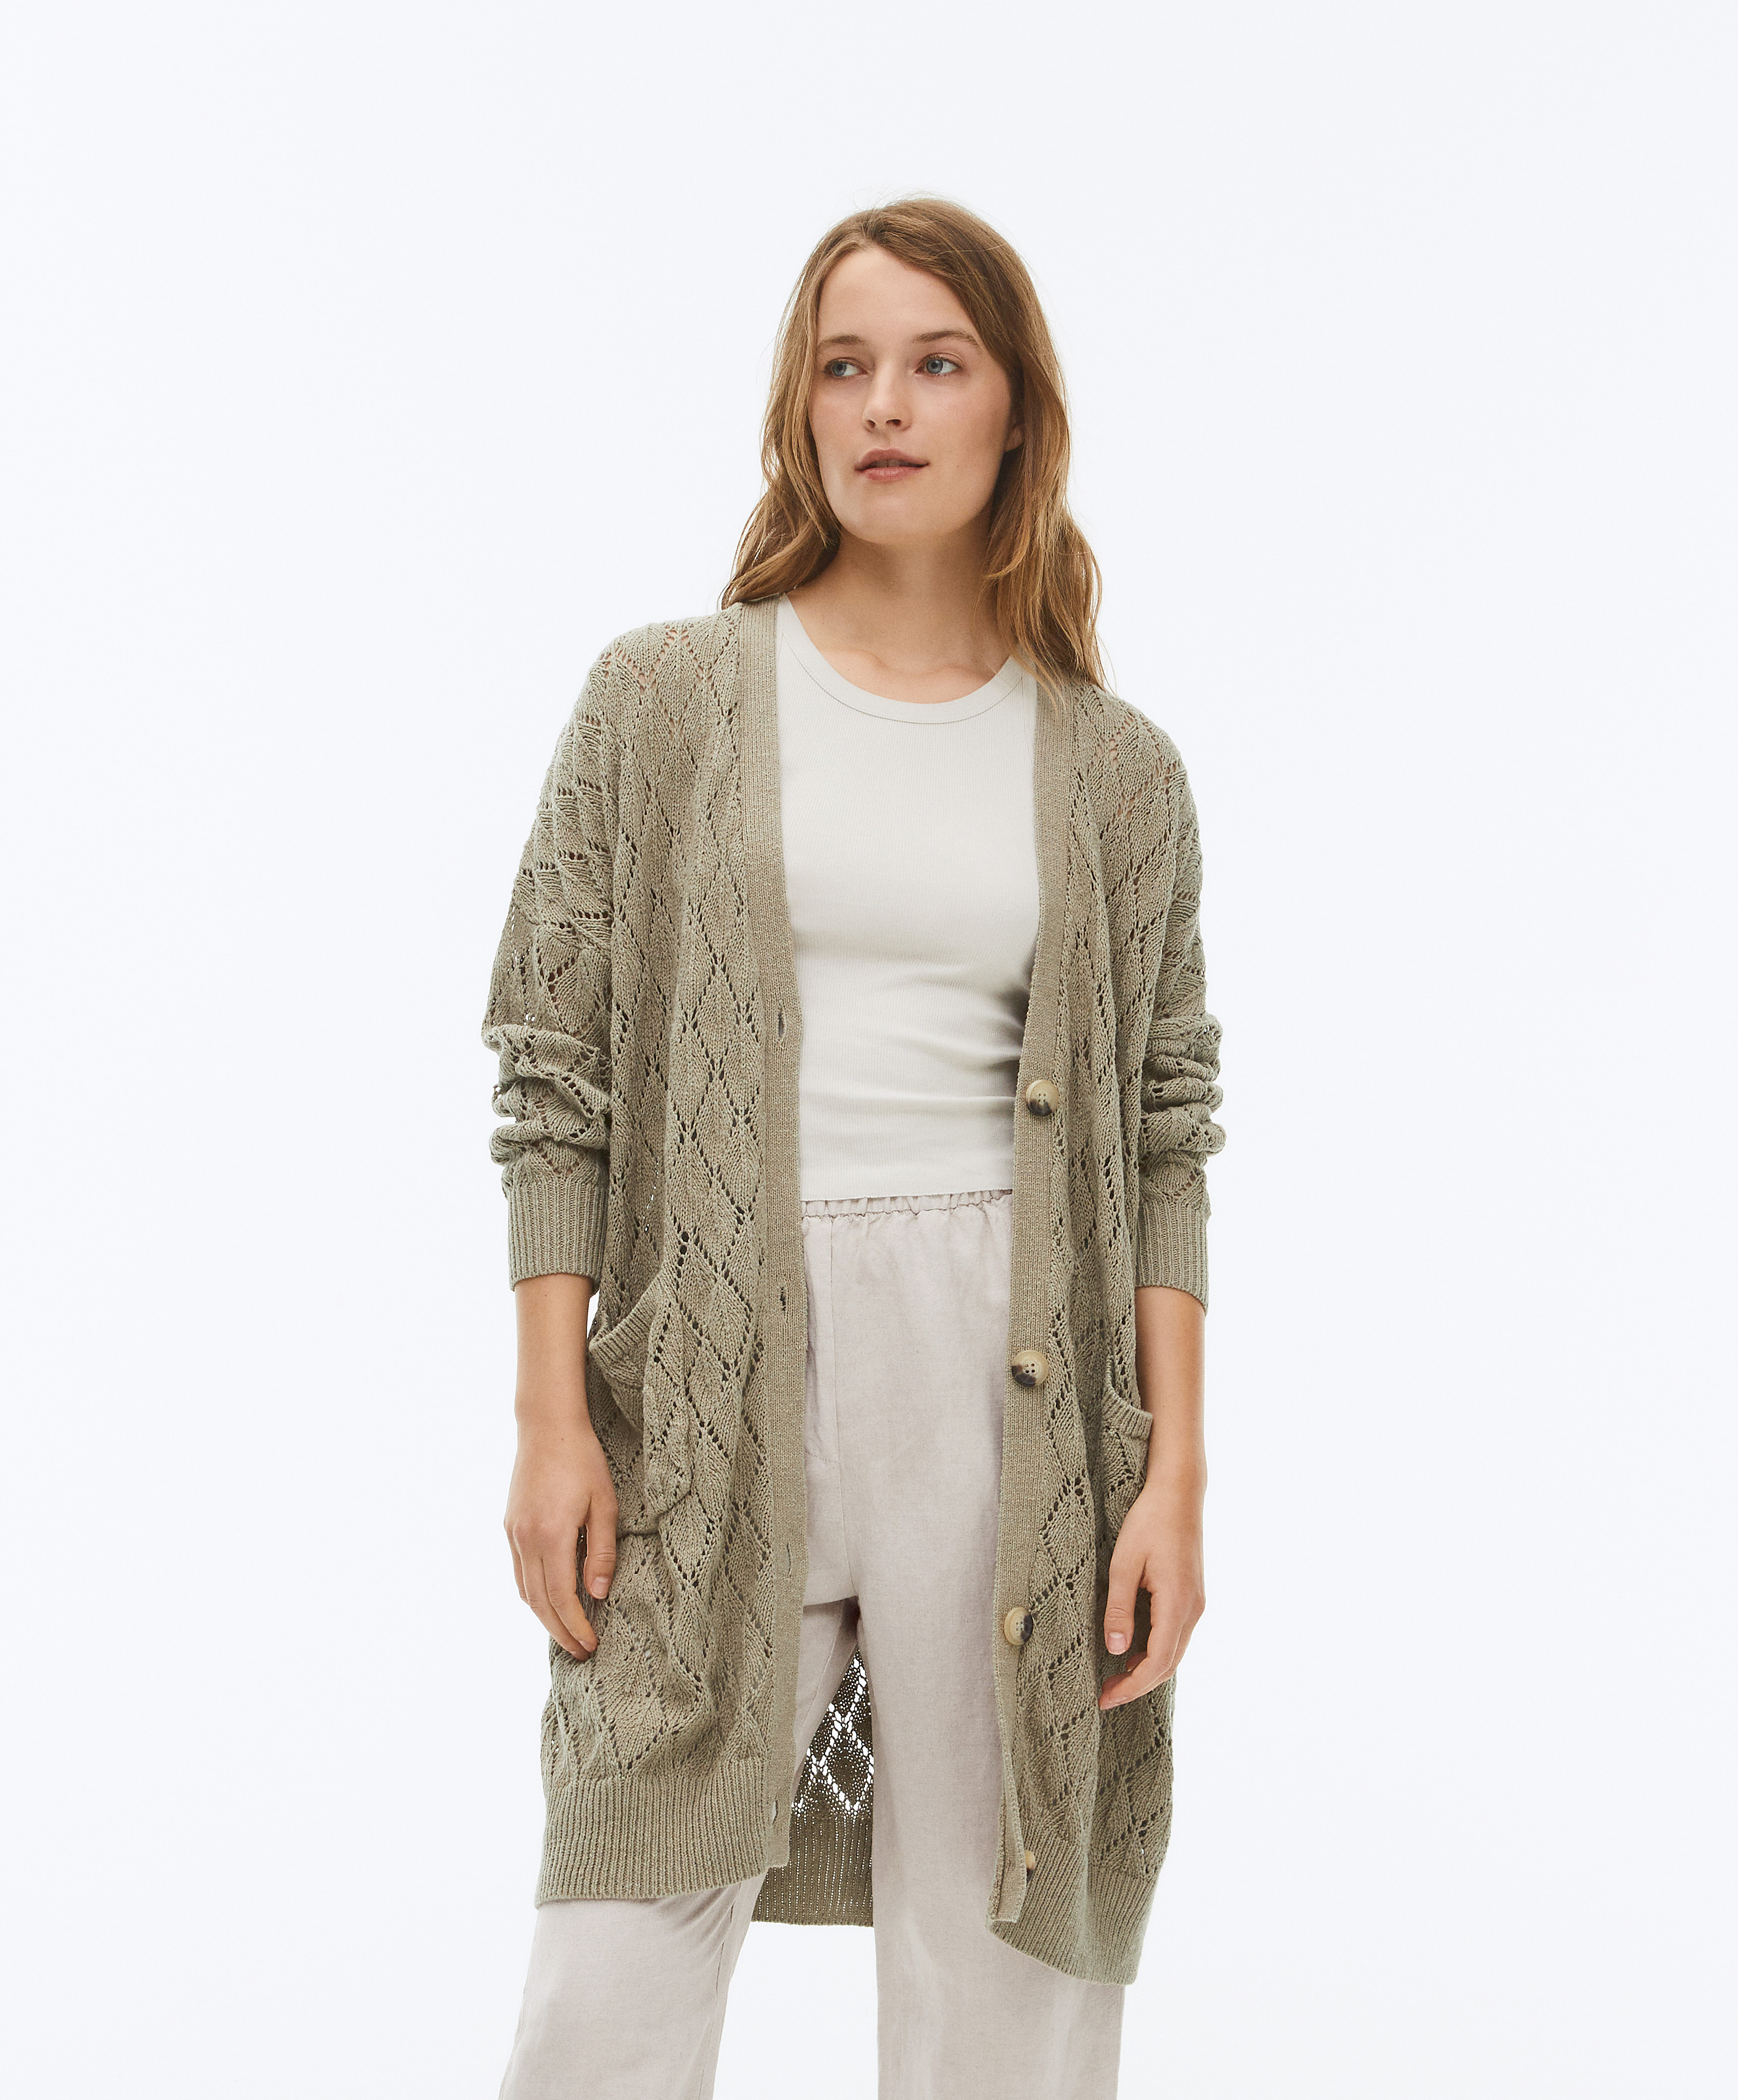 Long linen and cotton knit cardigan